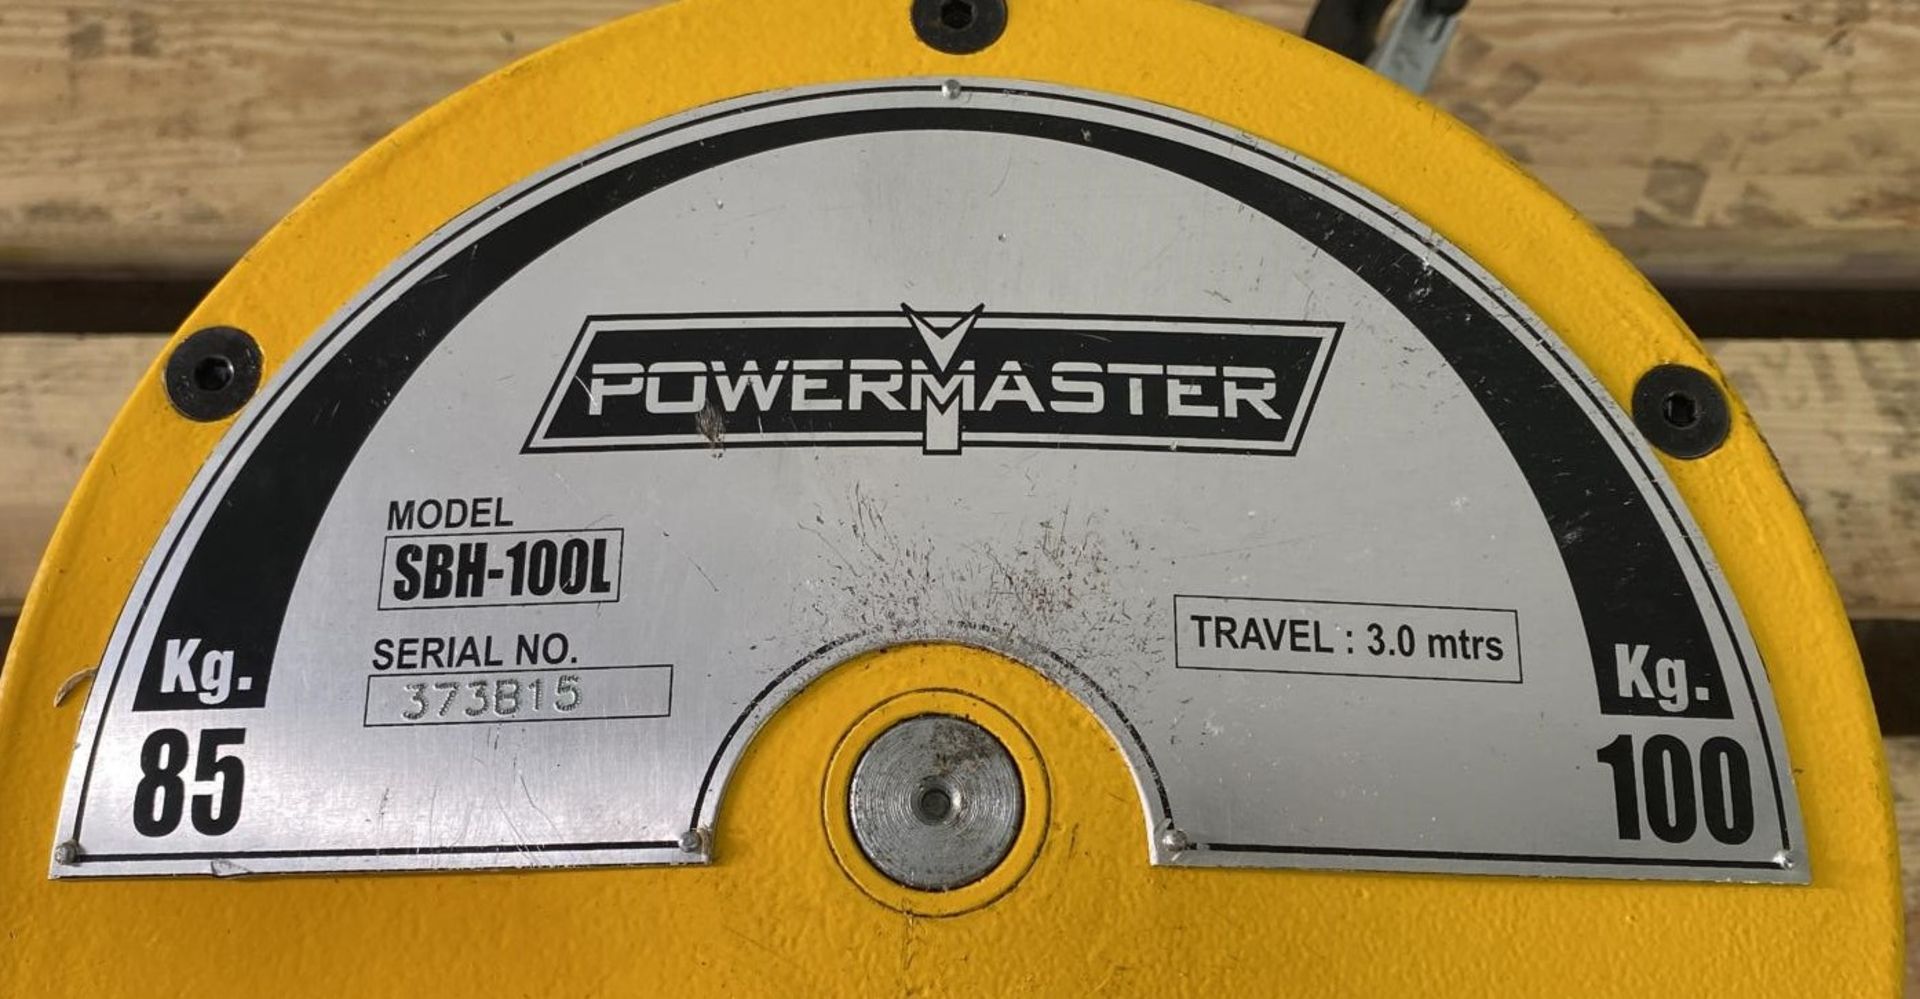 Powermaster Heavy Weight Balancer up to 100kg - Image 5 of 5